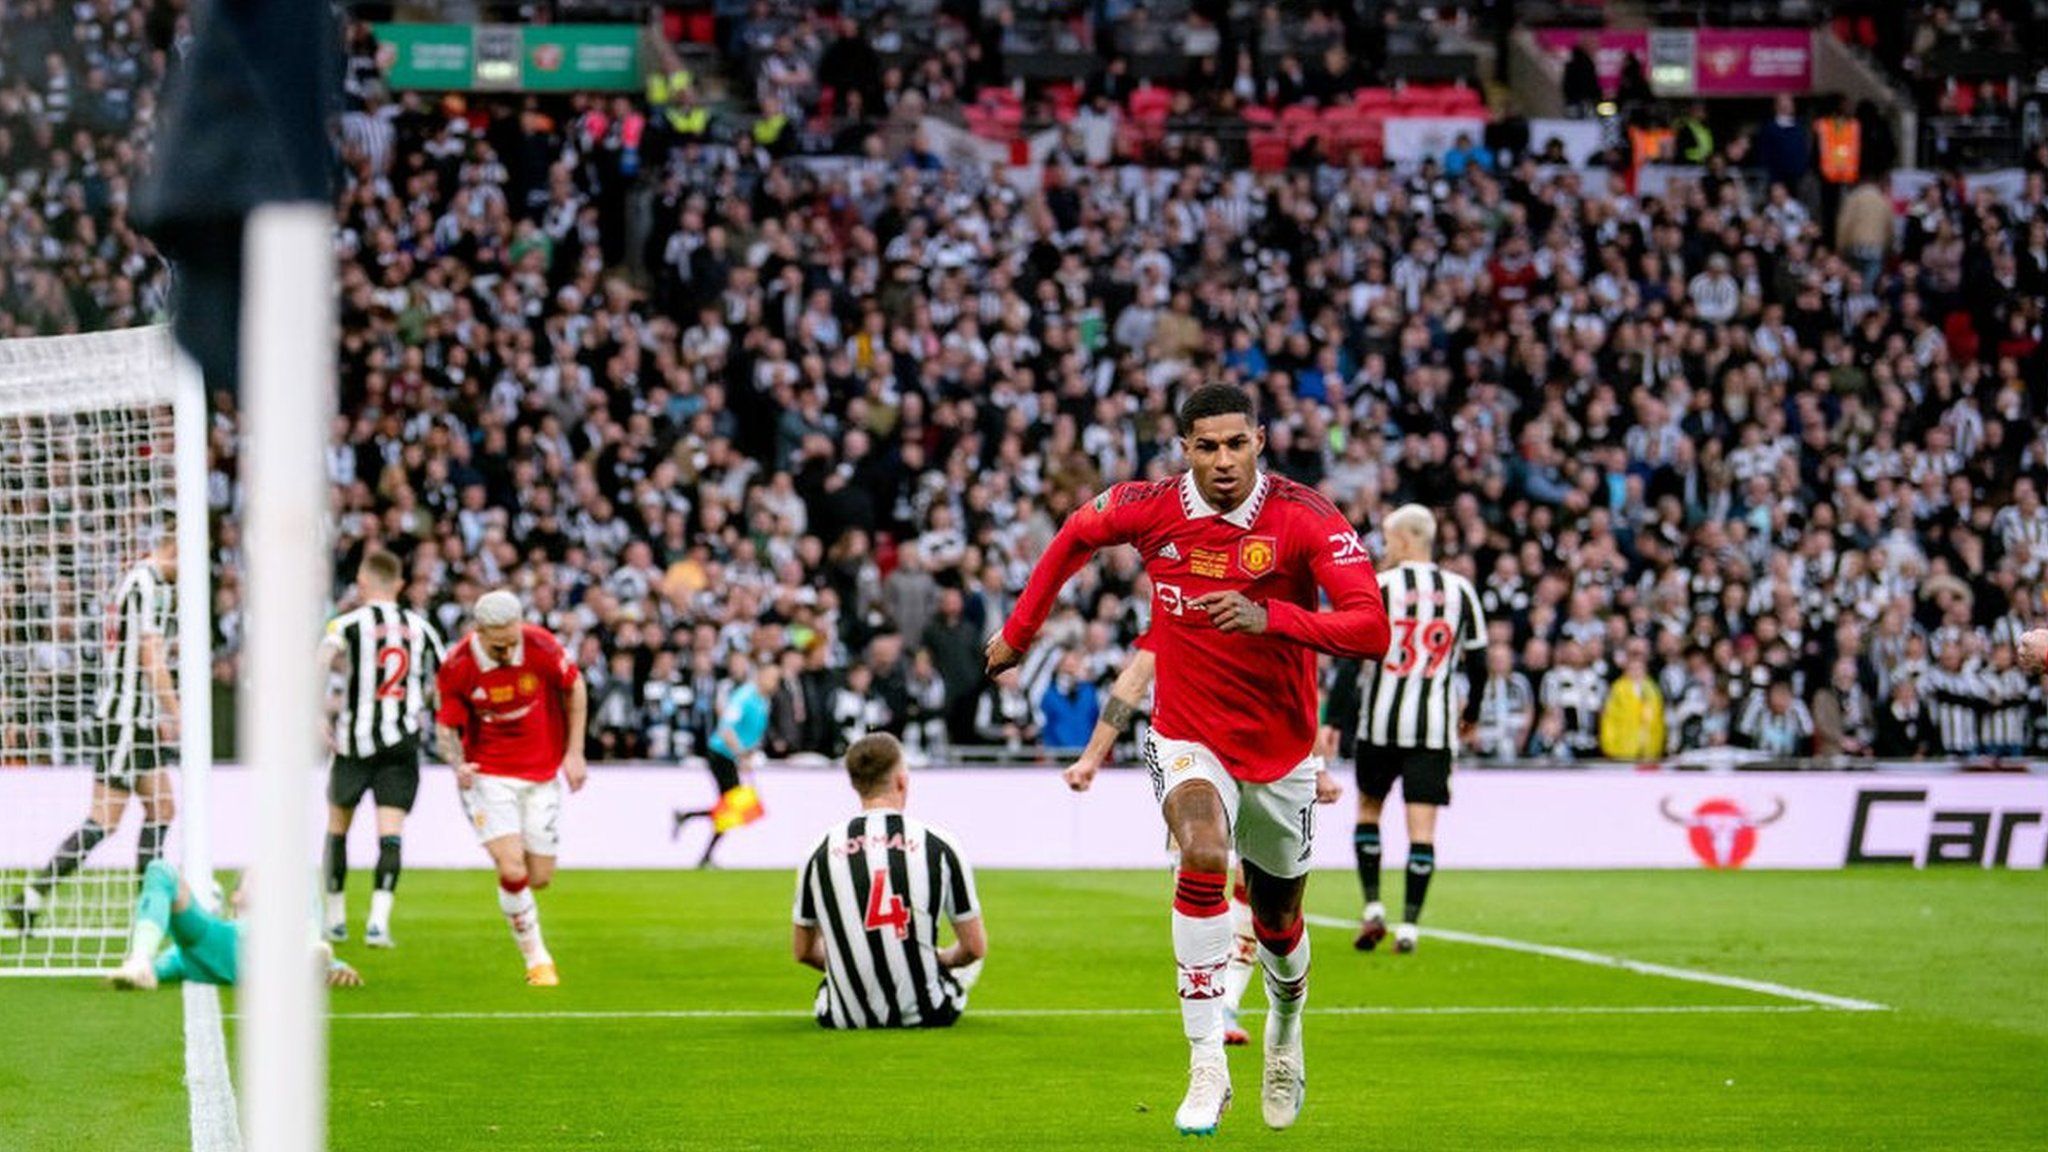 Marcus Rashford's shot was deflected into his own net by Newcastle's Sven Botman just before the break to put Manchester United 2-0 up.